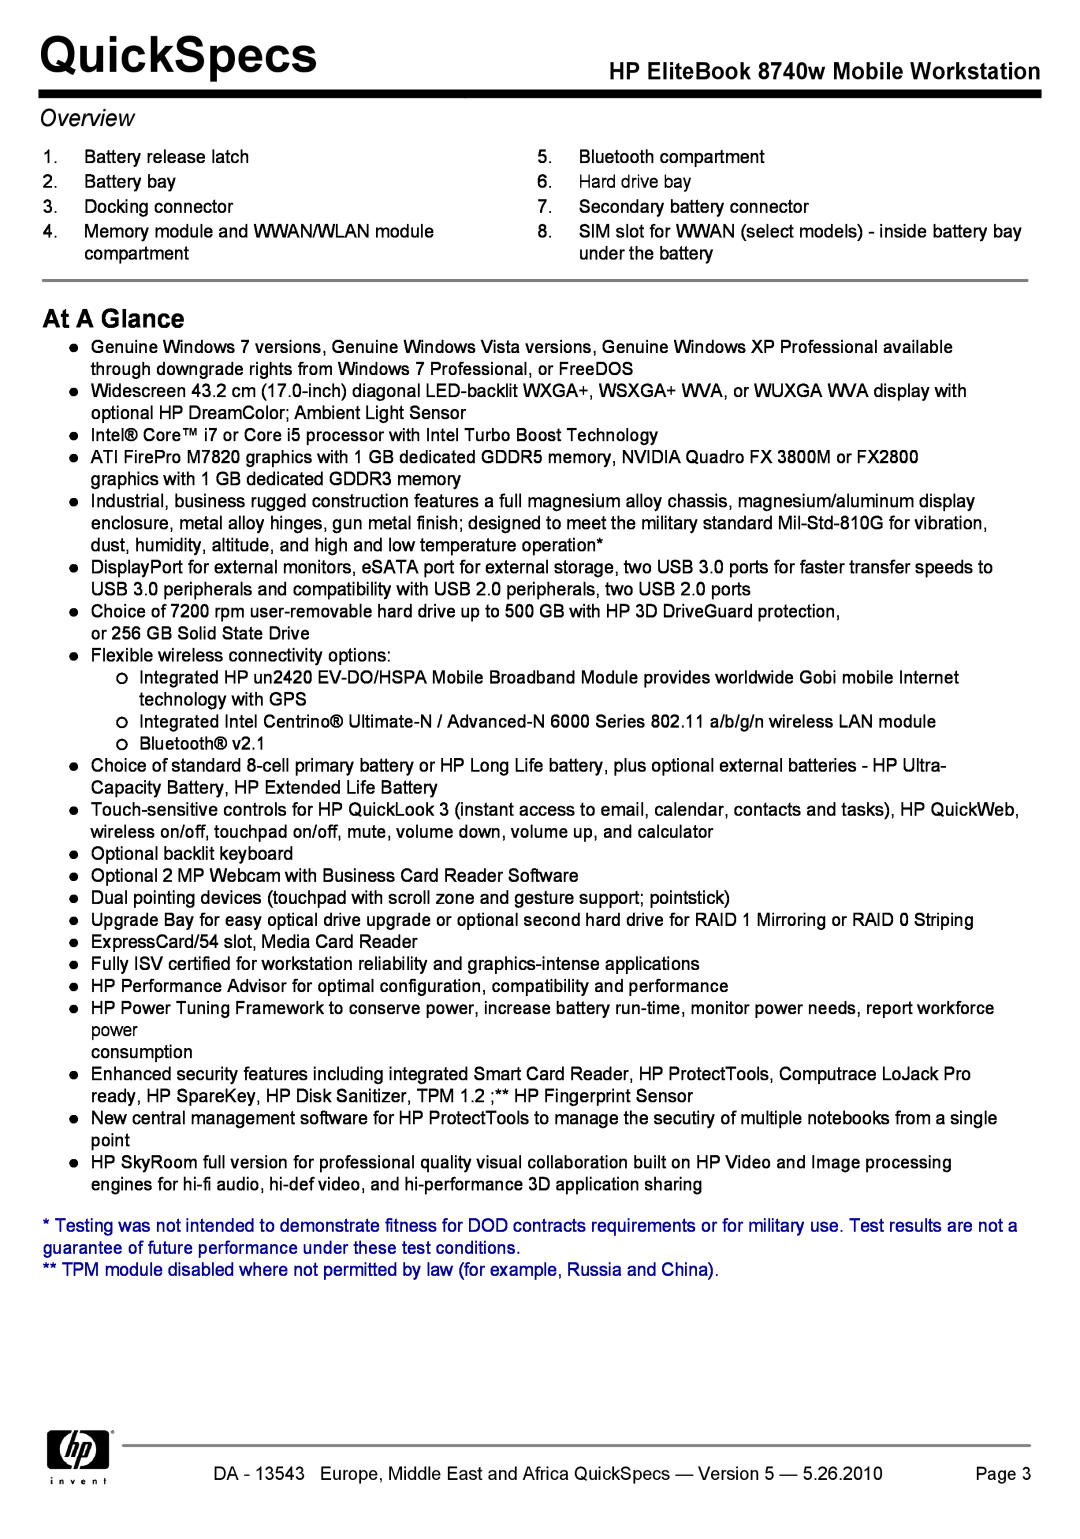 HP manual At A Glance, QuickSpecs, HP EliteBook 8740w Mobile Workstation, Overview 